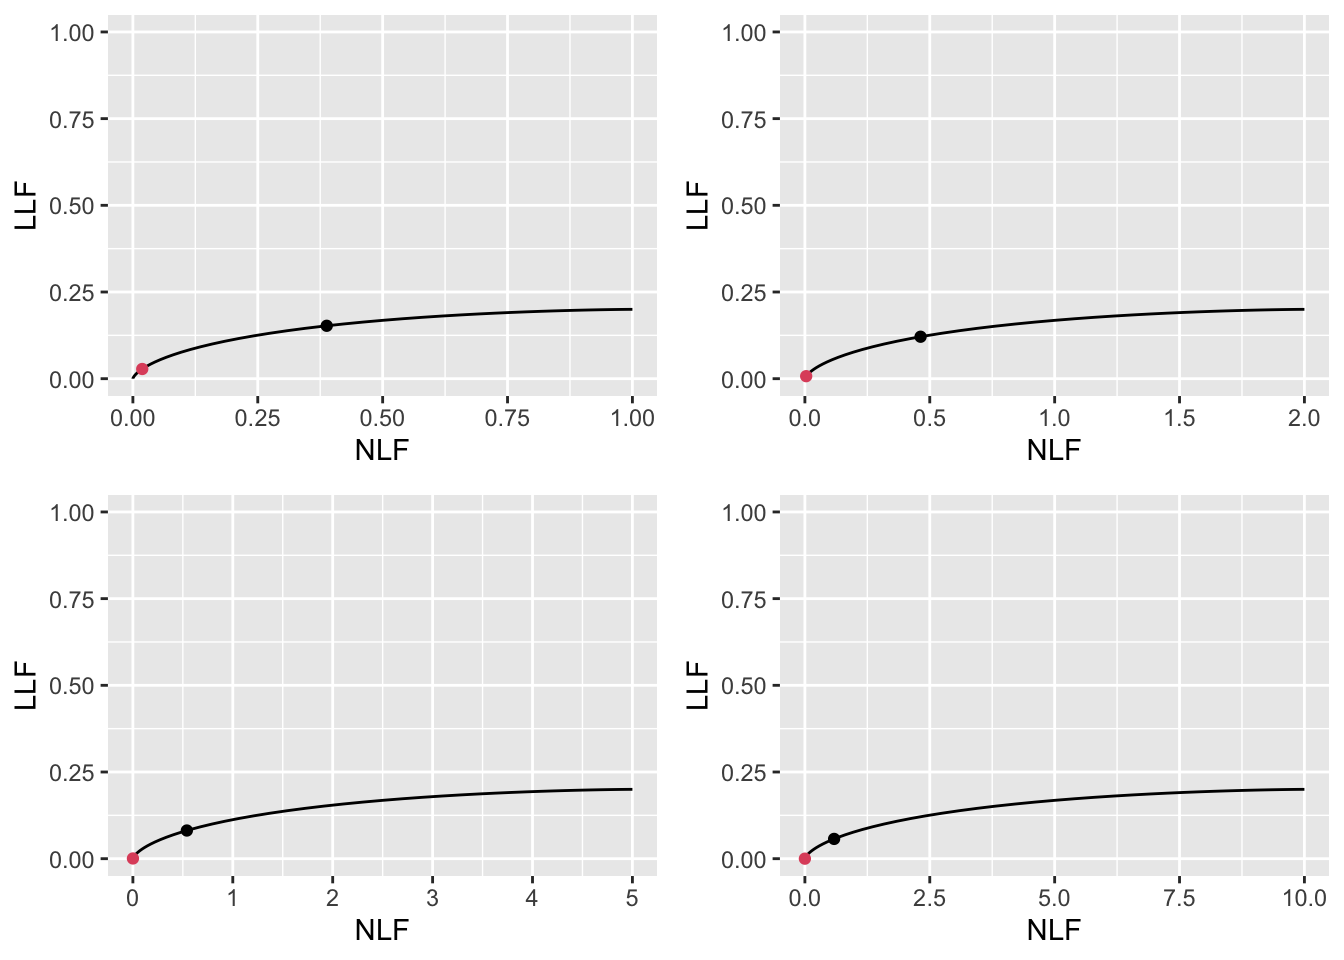 Low performance varying $\lambda$ FROC plots with superimposed operating points. The red dot corresponds to $\text{wAFROC}_\text{AUC}$ optimization and the black dot to Youden-index optimization. The values of $\lambda$ are: top-left $\lambda = 1$, top-right $\lambda = 2$, bottom-left $\lambda = 5$ and bottom-right $\lambda = 10$.